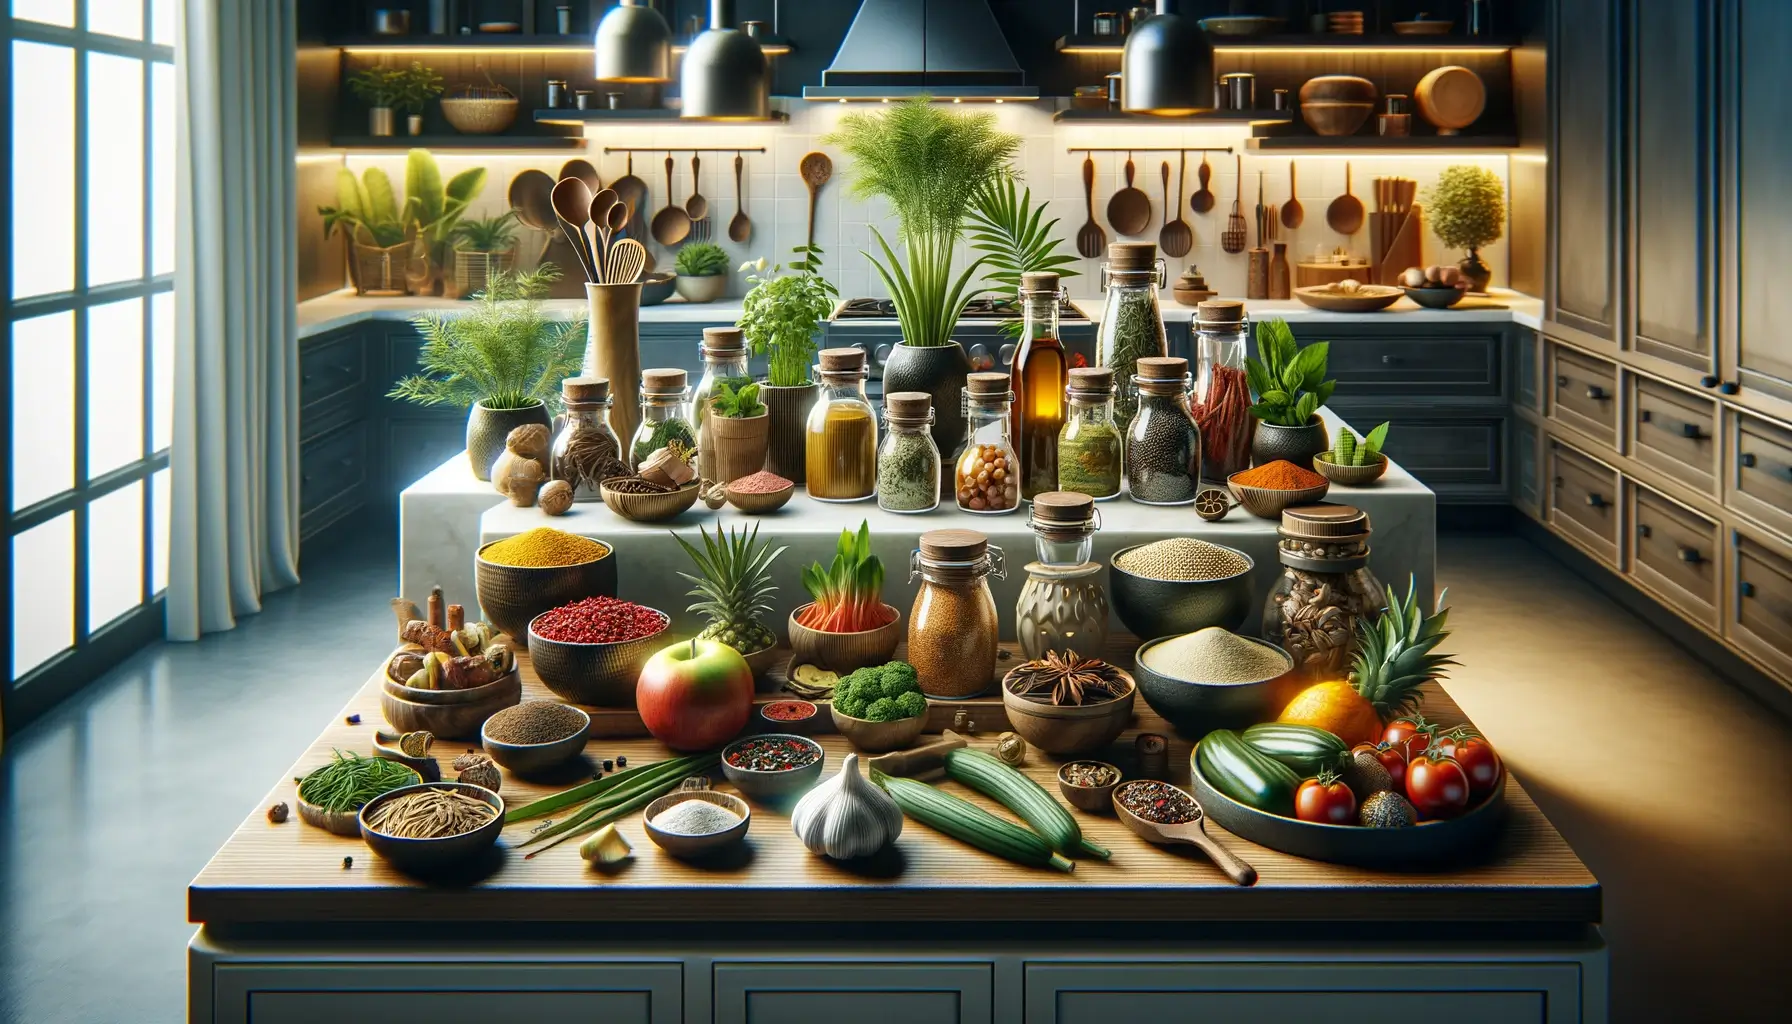 Array of exotic ingredients on a kitchen island, with various spices, herbs, and fresh produce arranged neatly against a backdrop of dark cabinets and culinary utensils.